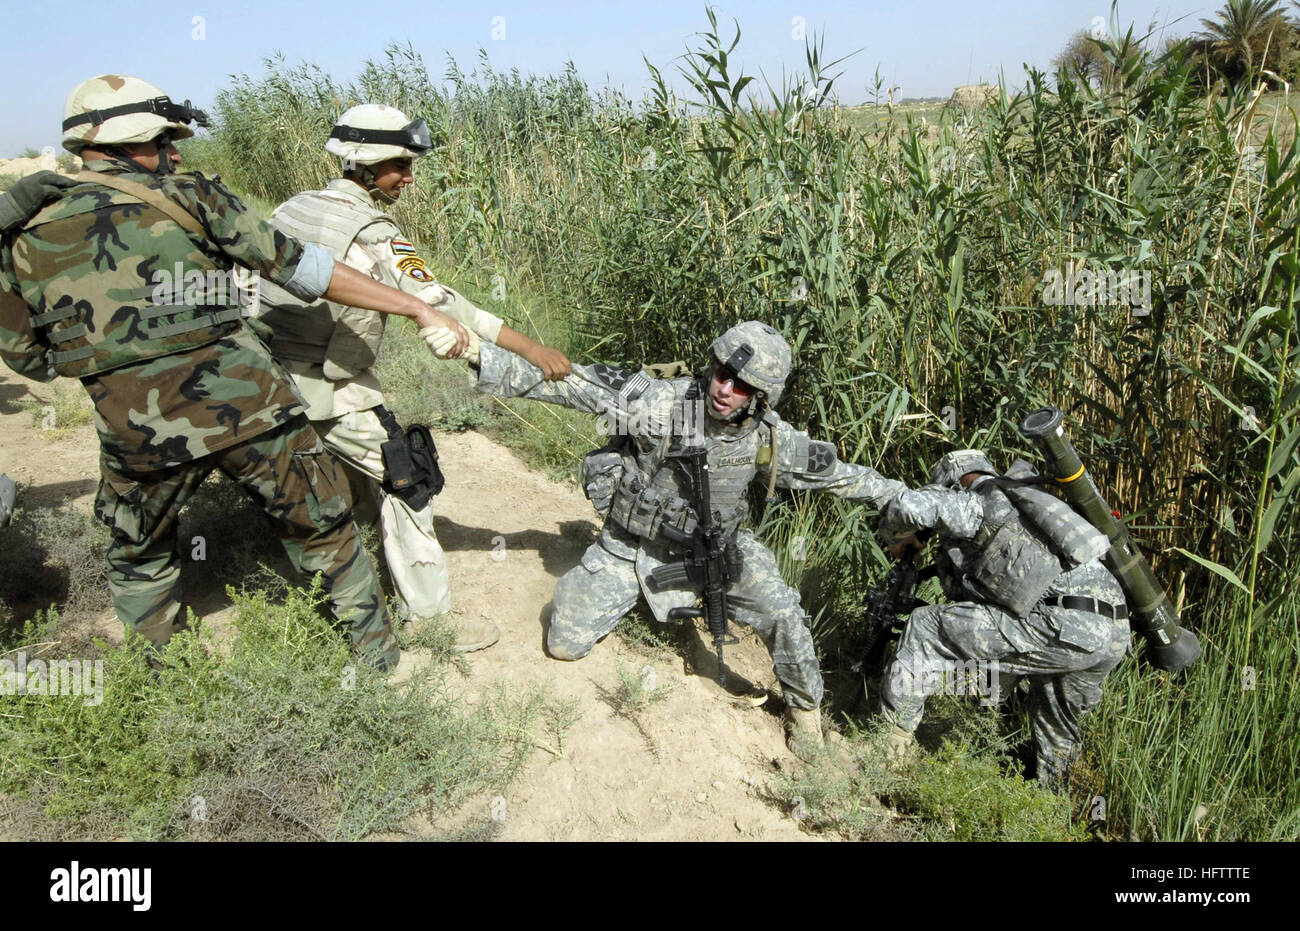 070712-N-9500T-105 KHAN BANI SA'AD, Iraq (July 12, 2007) Ð U.S. Army Sgt. Steven Calhoun is assisted by Iraqi army soldiers in pulling out a Soldier after he fell into an irrigation ditch during a joint mission.  Soldiers assigned to Alpha Battery, 2nd Battalion, 12th Infantry Regiment, 2nd Infantry Division, and units of the Iraqi army are conducting a cordon and search mission to clear the area of insurgents and cache sites. U.S. Navy photo by Mass Communication Specialist 2nd Class Scott Taylor (RELEASED) US Navy 070712-N-9500T-105 U.S. Army Sgt. Steven Calhoun is assisted by Iraqi army sol Stock Photo